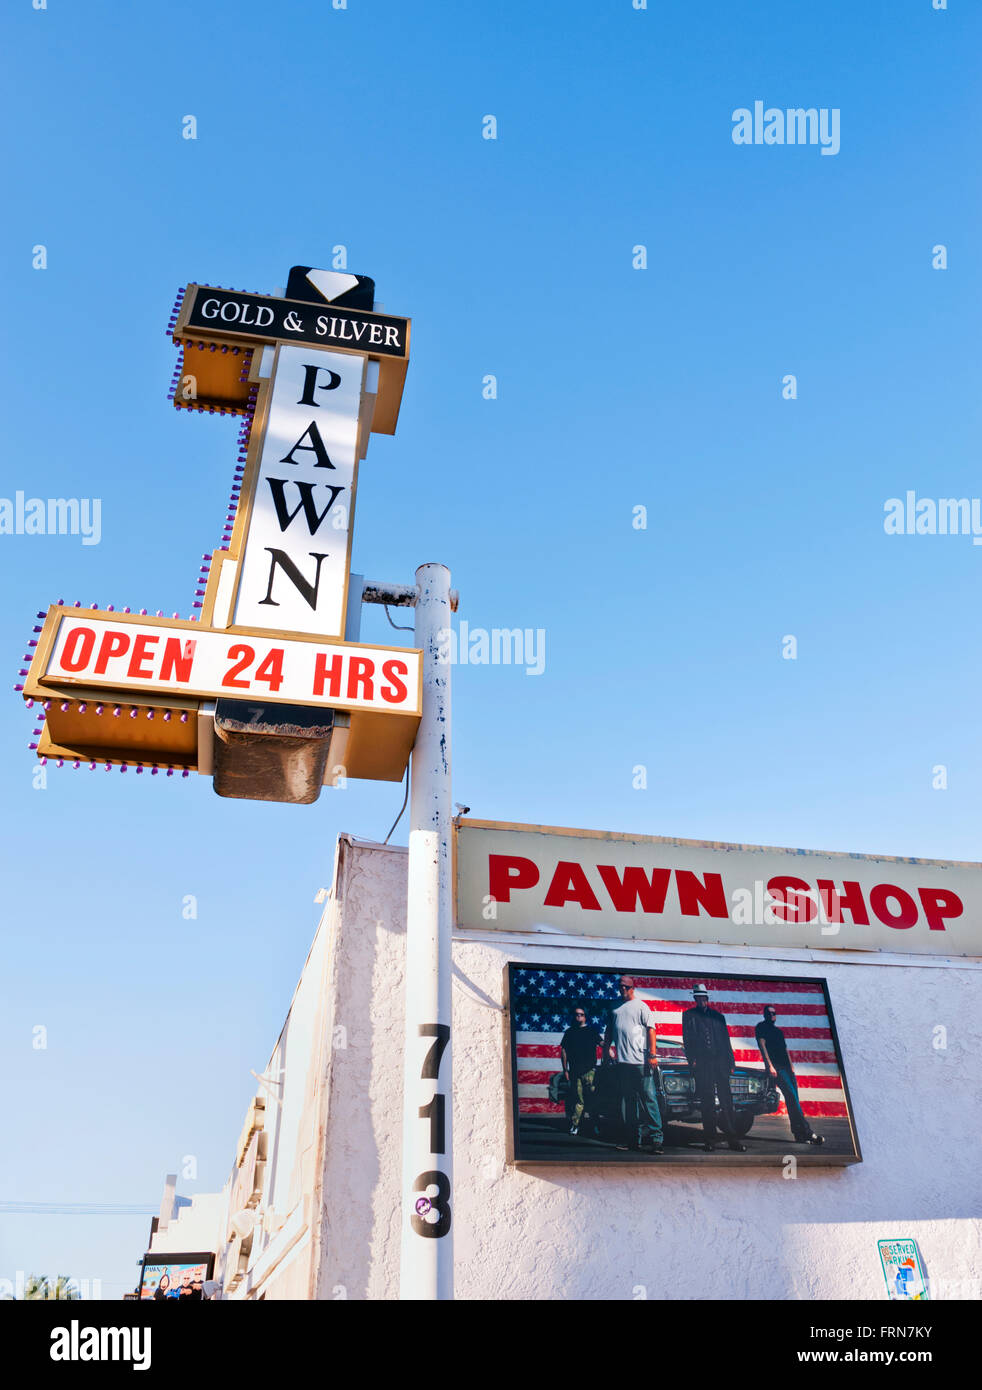 The Famous Pawnstars Pawn Stars 'Gold & Silver' Pawn Shop in Las Vegas, Nevada. Made famous by the History Channel Stock Photo